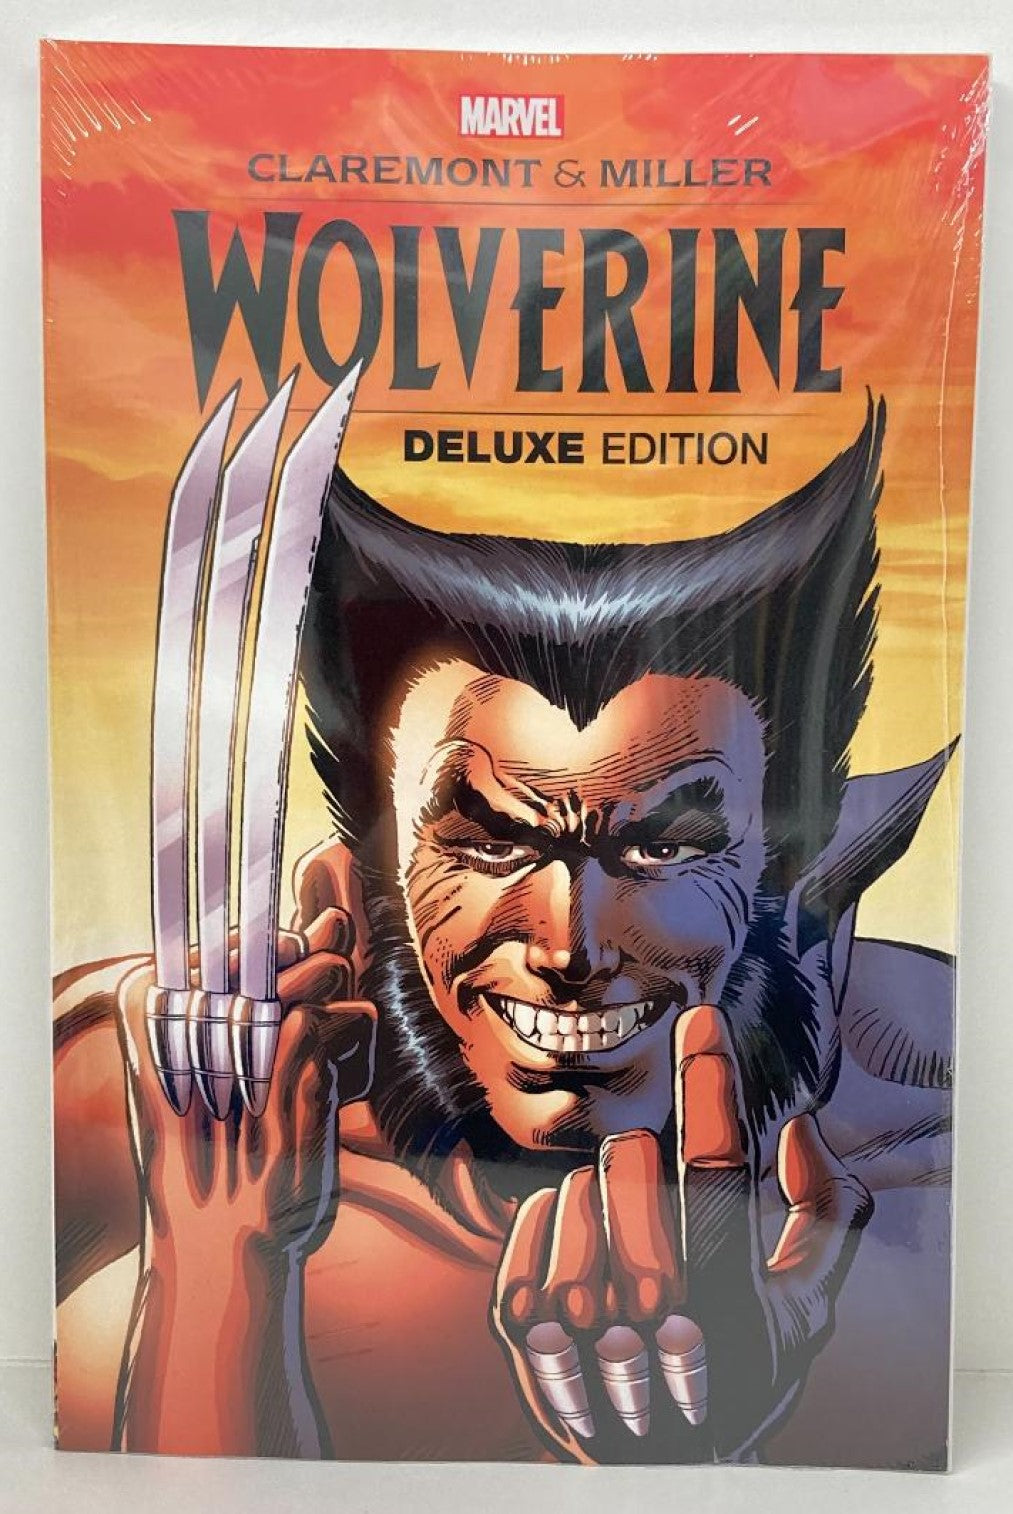 Wolverine Deluxe Edition - The Comic Warehouse